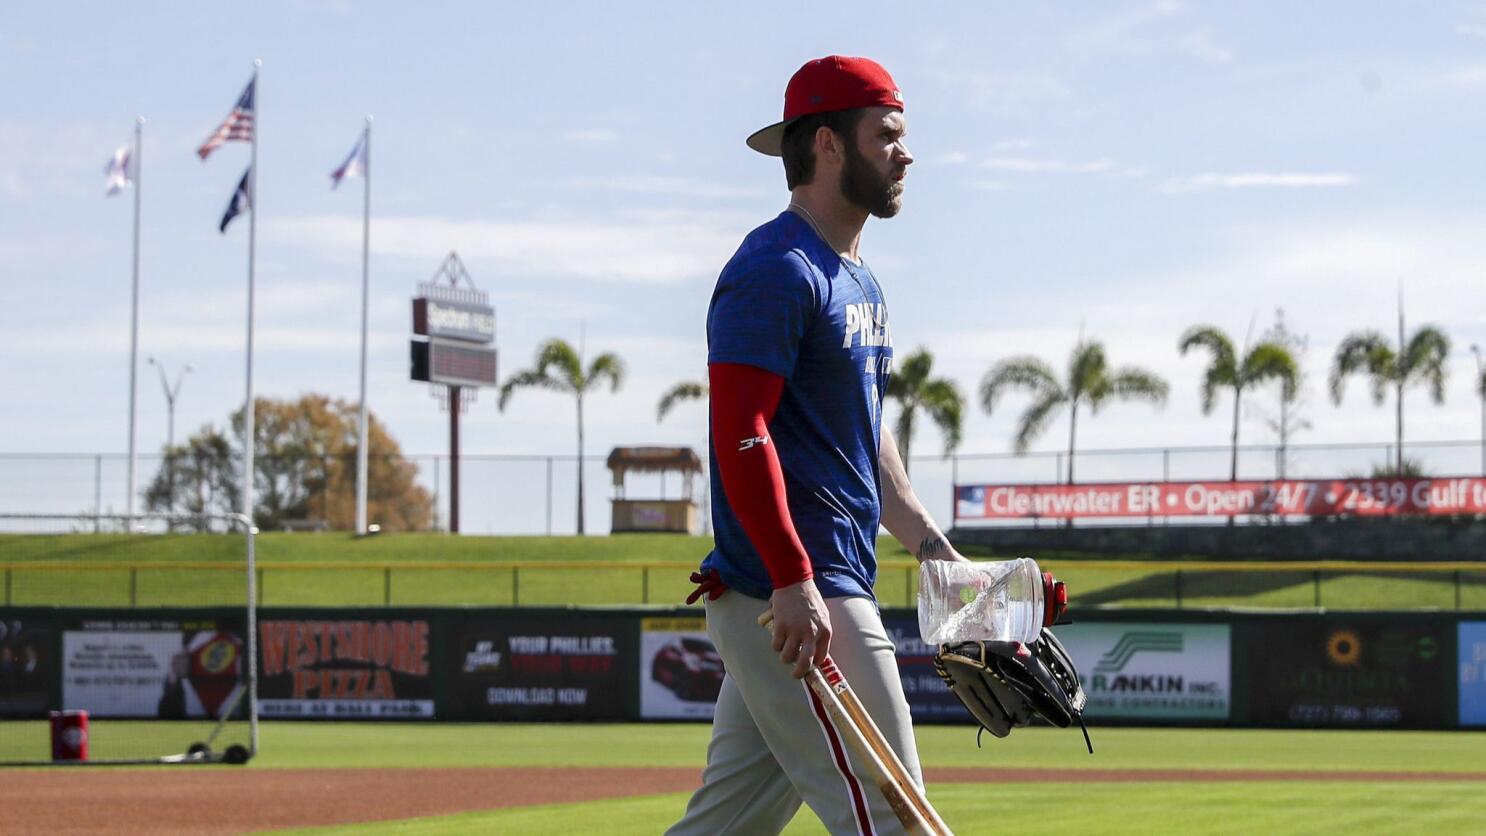 Bryce Harper, Manny Machado: Pros, cons to signing them in free agency